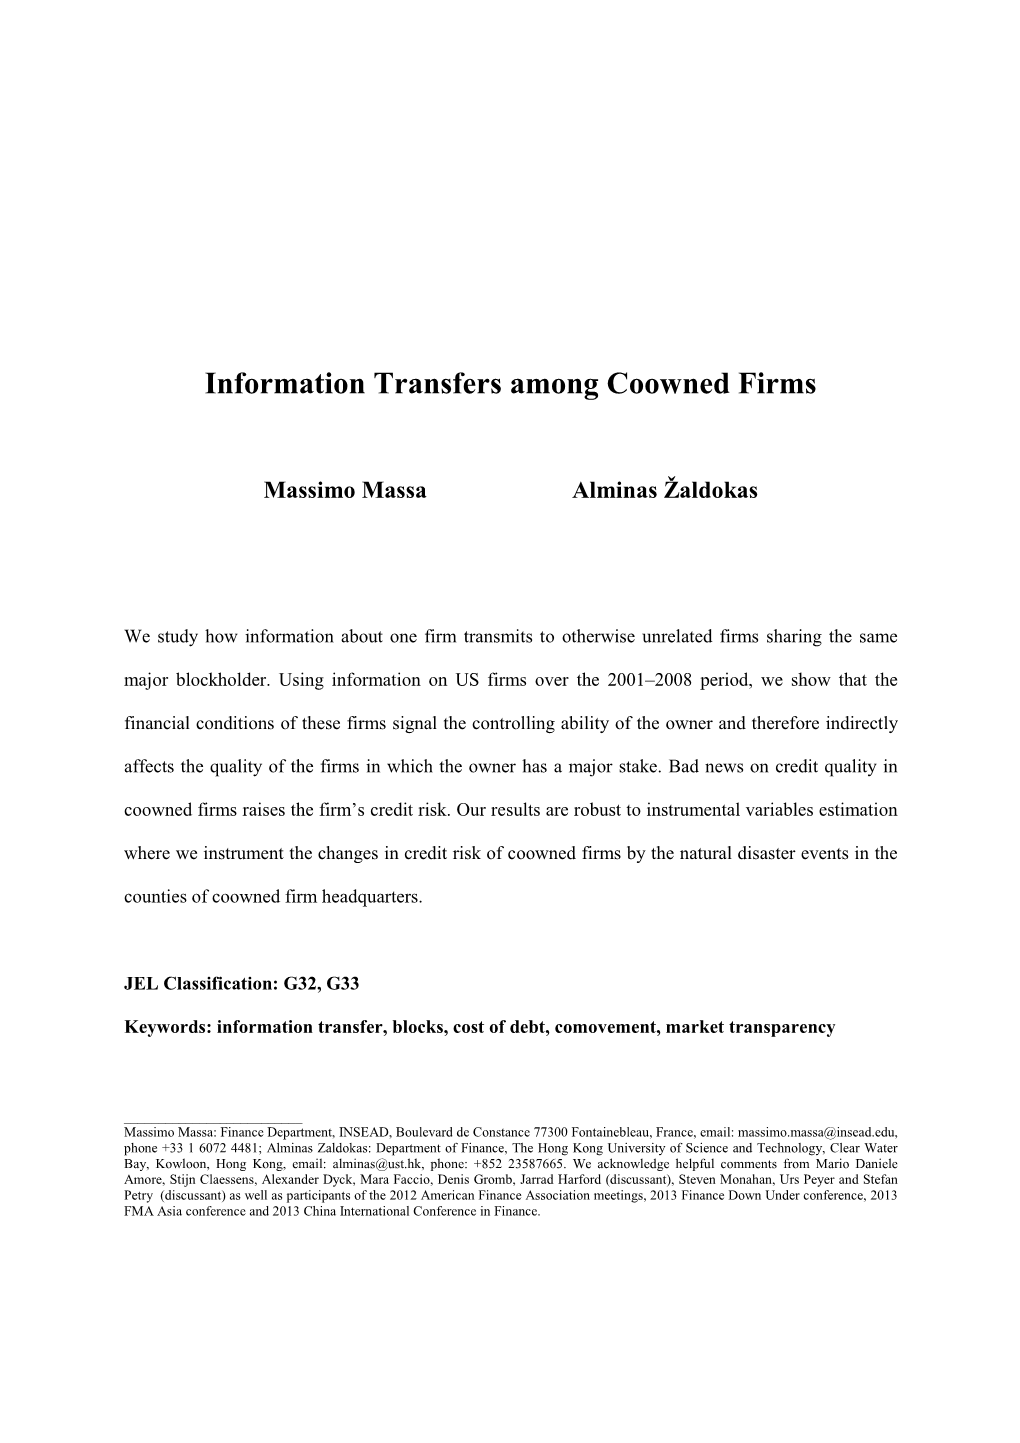 Information Transfers Among Coowned Firms